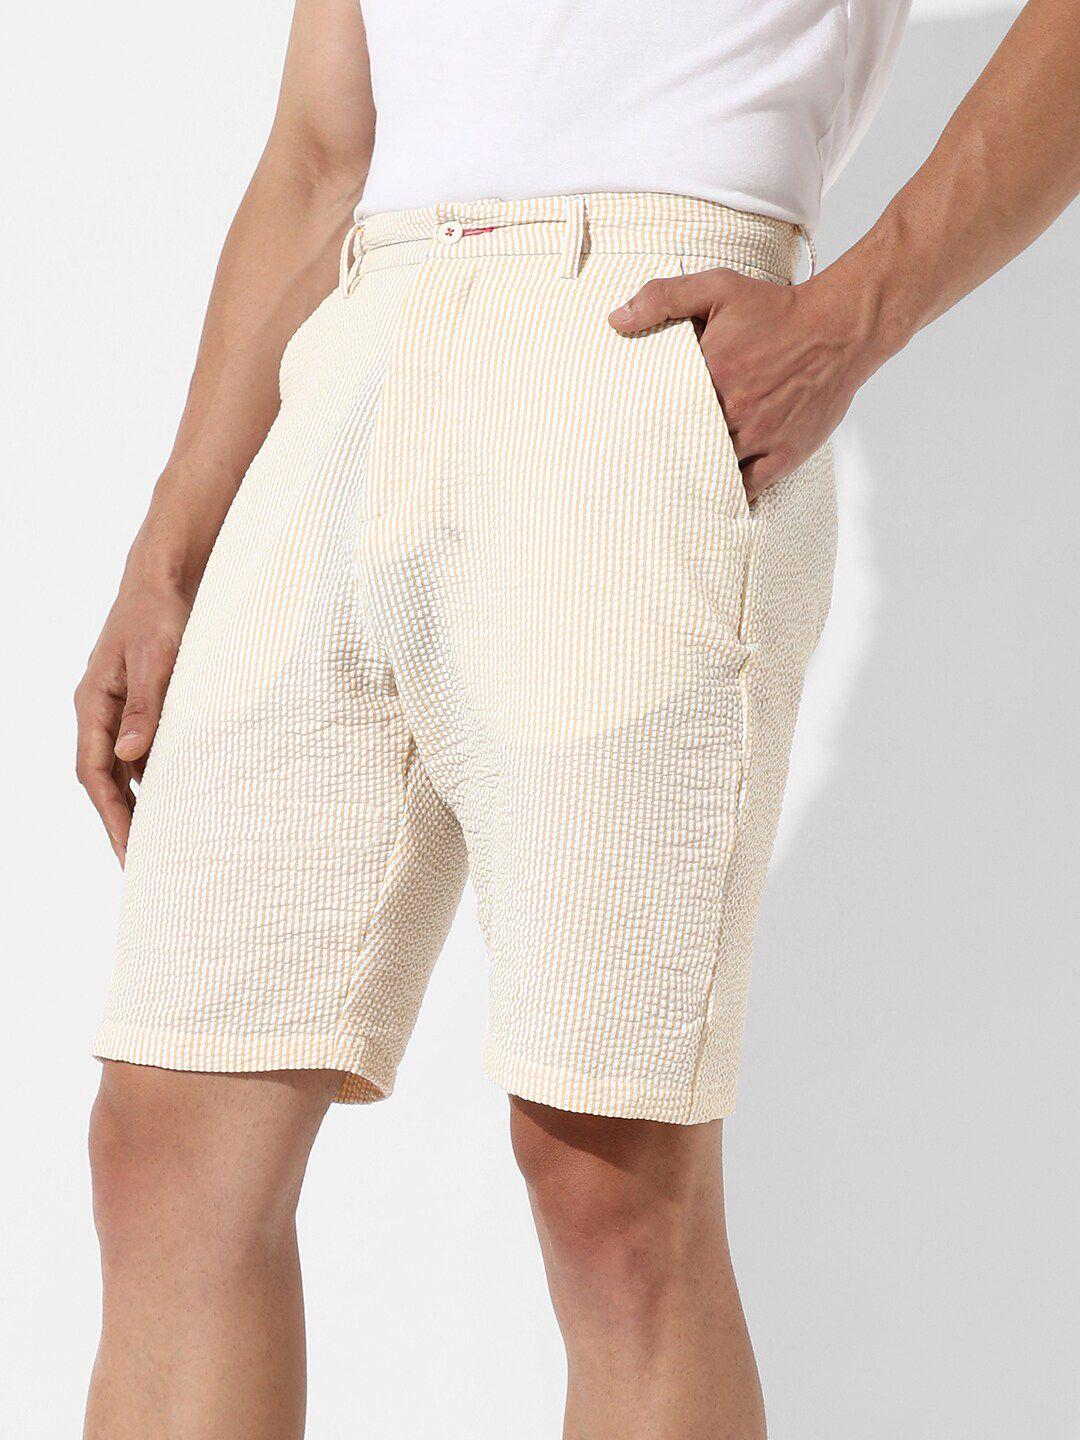 campus sutra men striped mid-rise cotton shorts